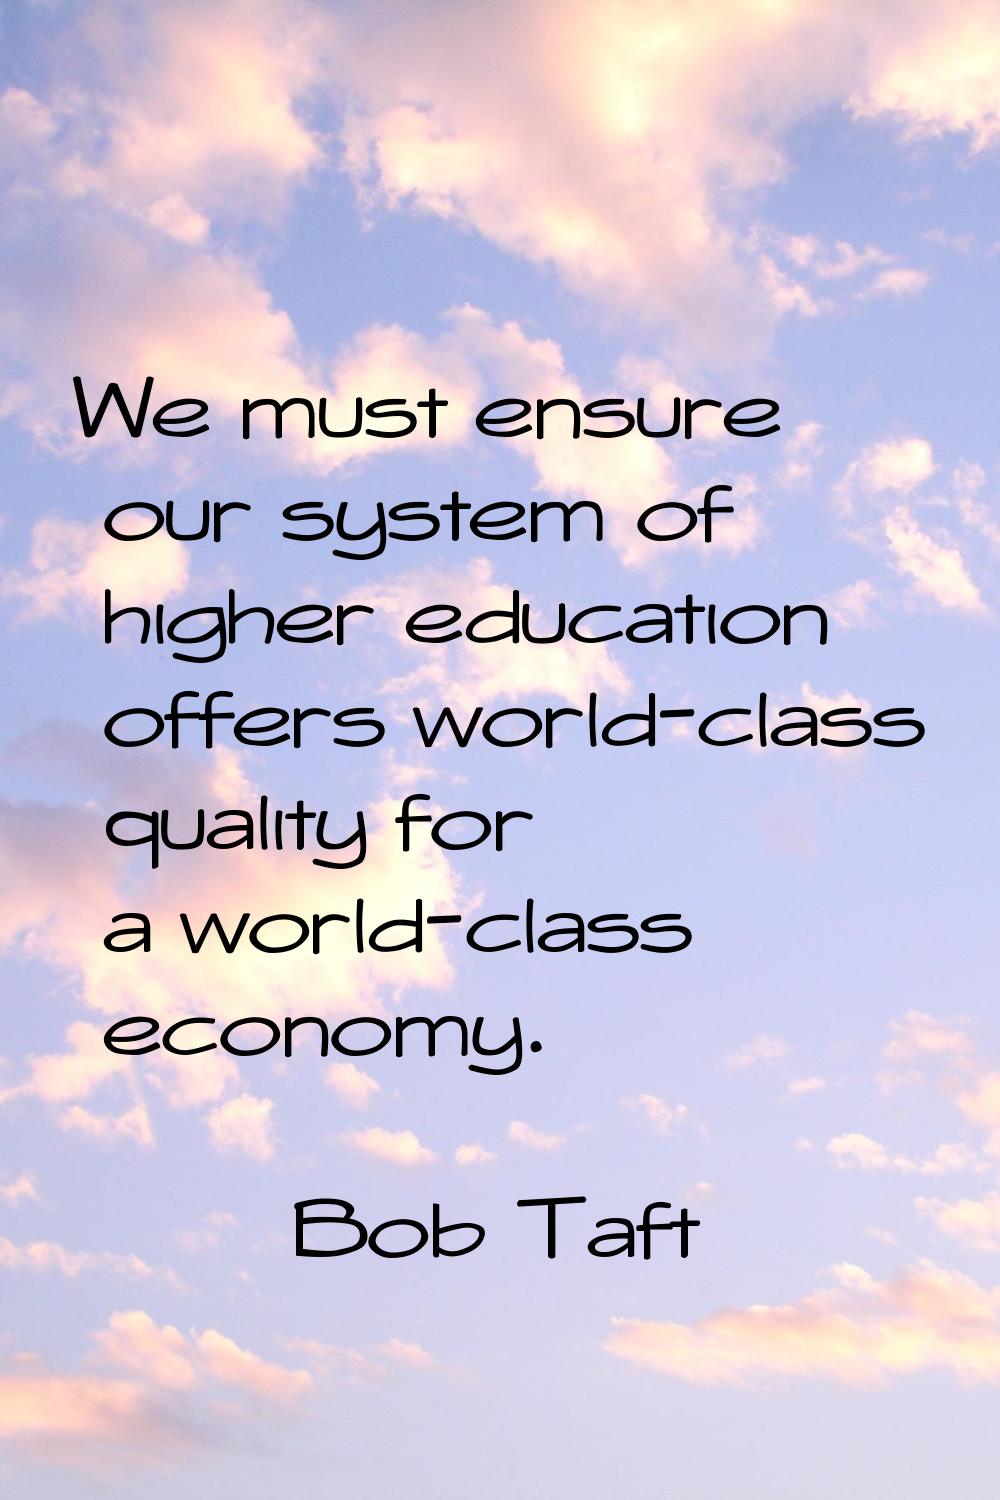 We must ensure our system of higher education offers world-class quality for a world-class economy.